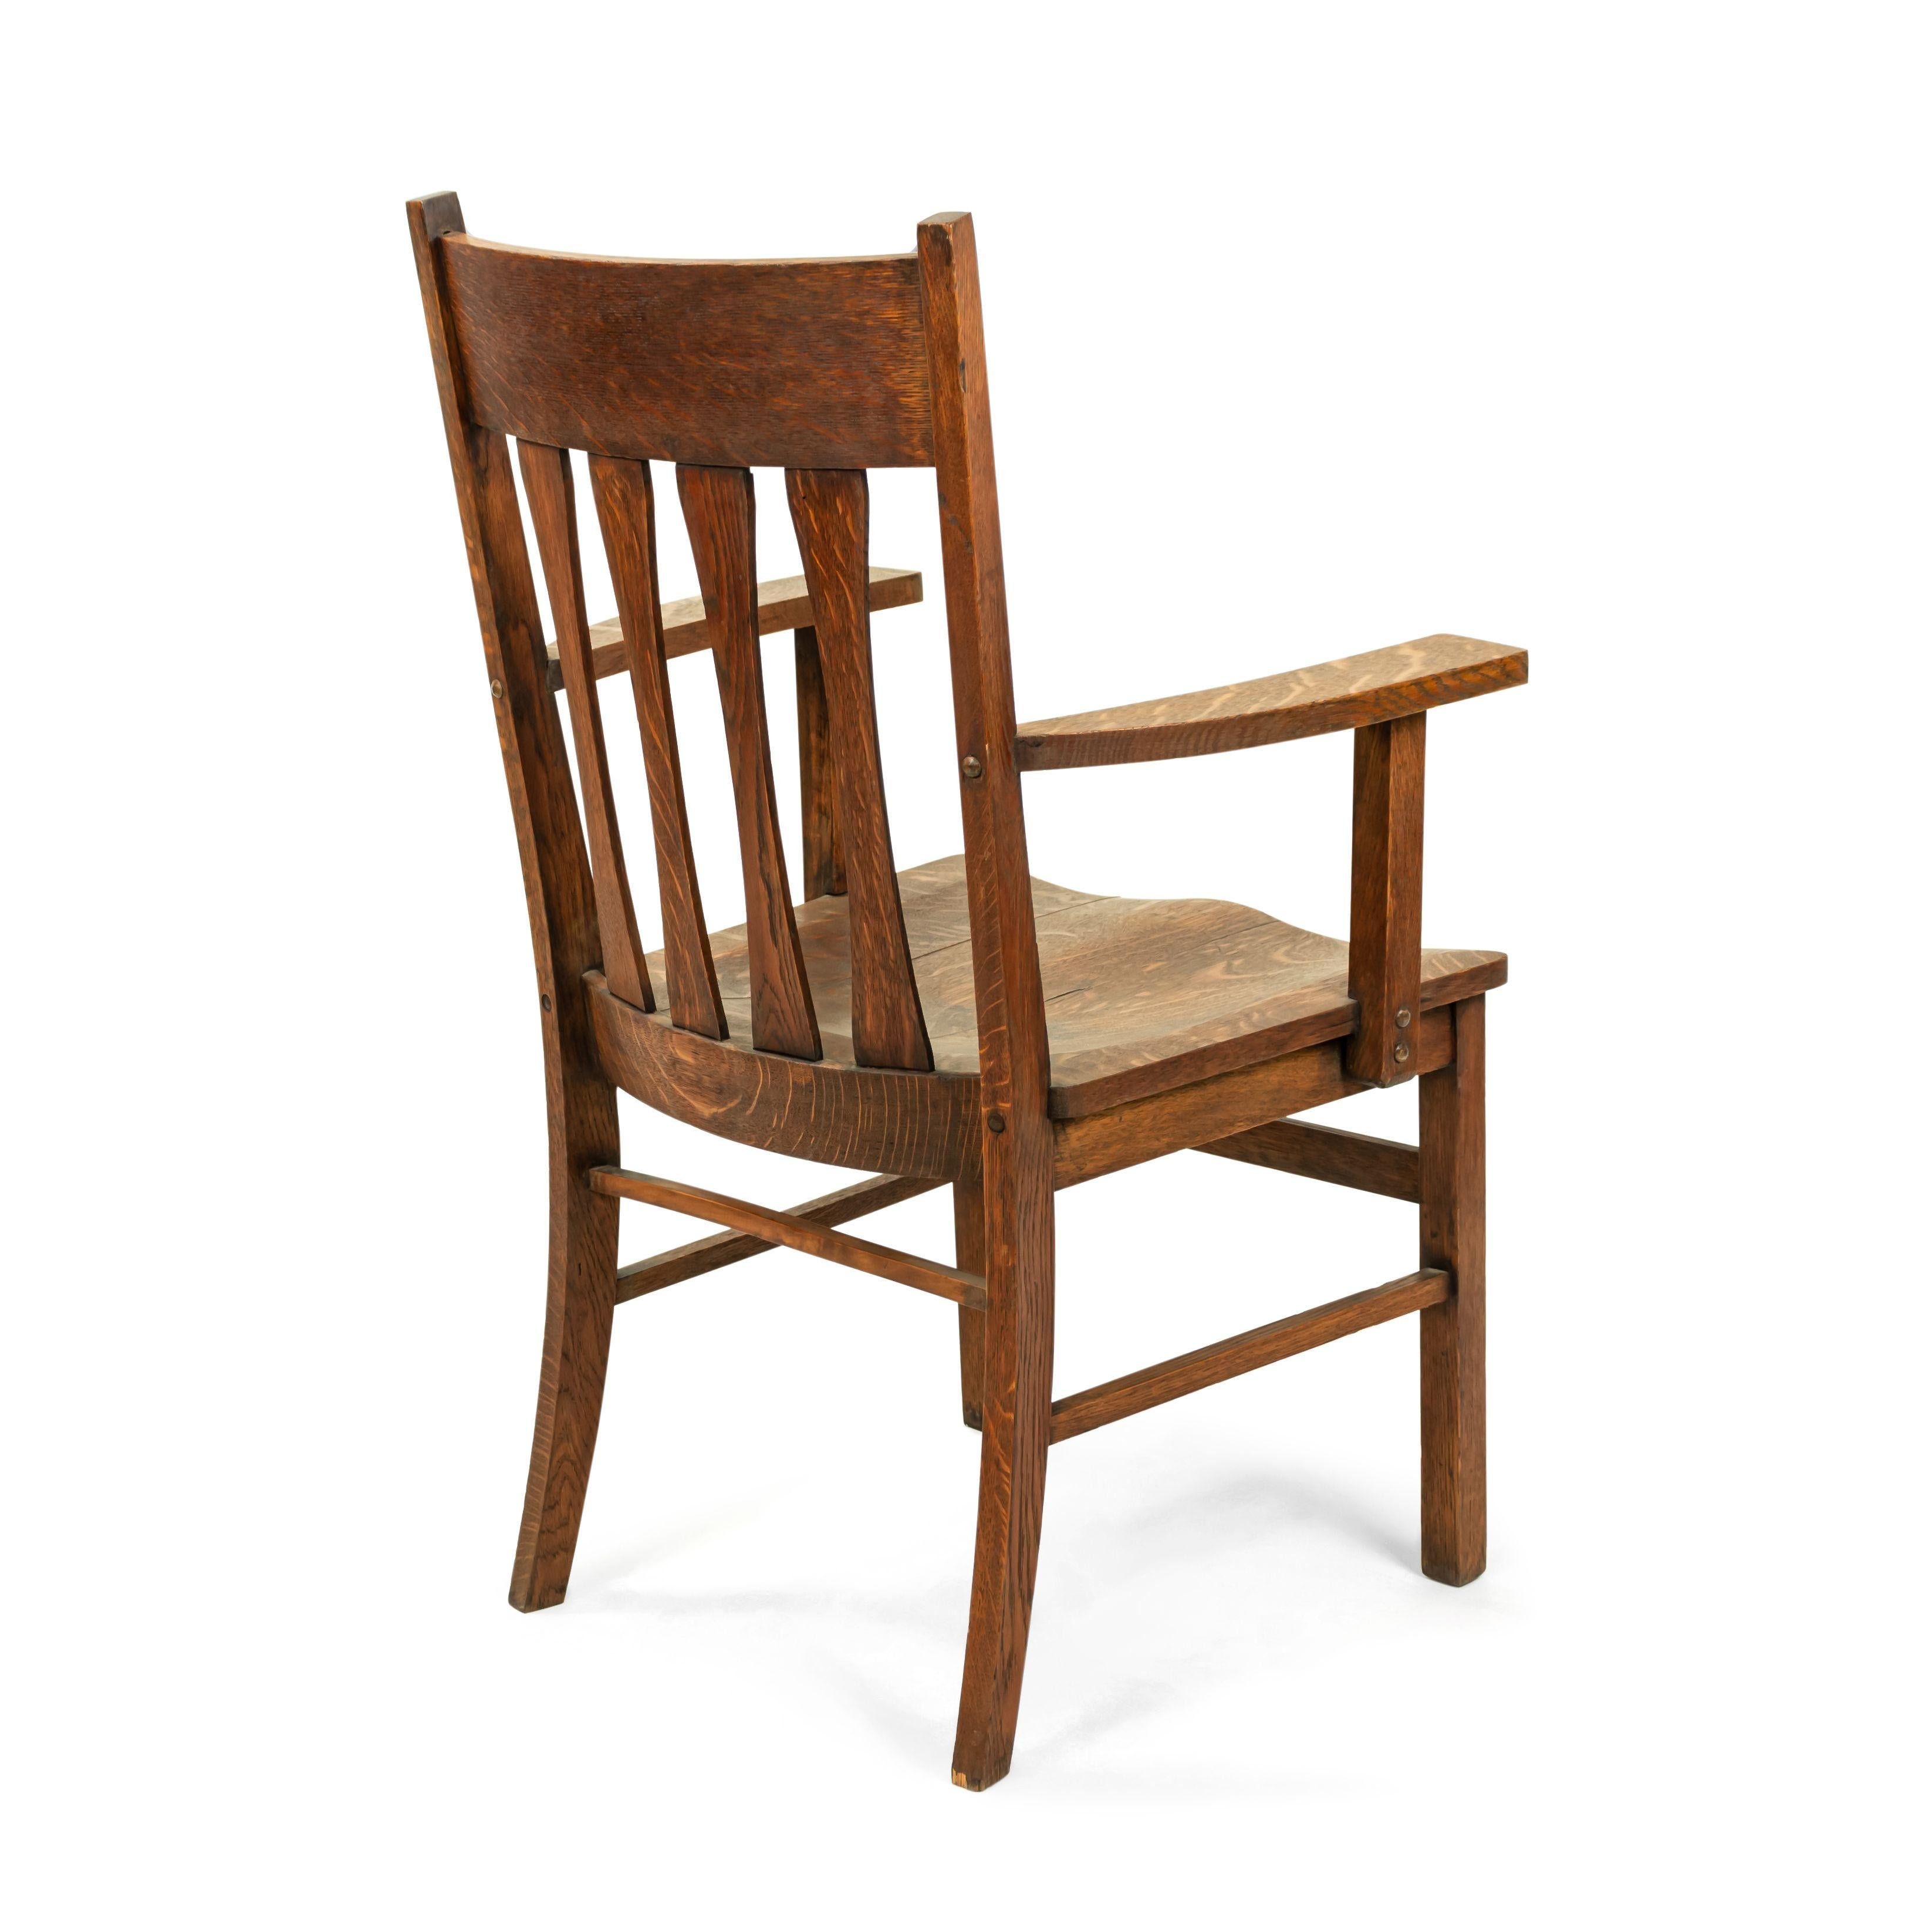 20th Century American Mission Slat Back Wooden Armchair For Sale